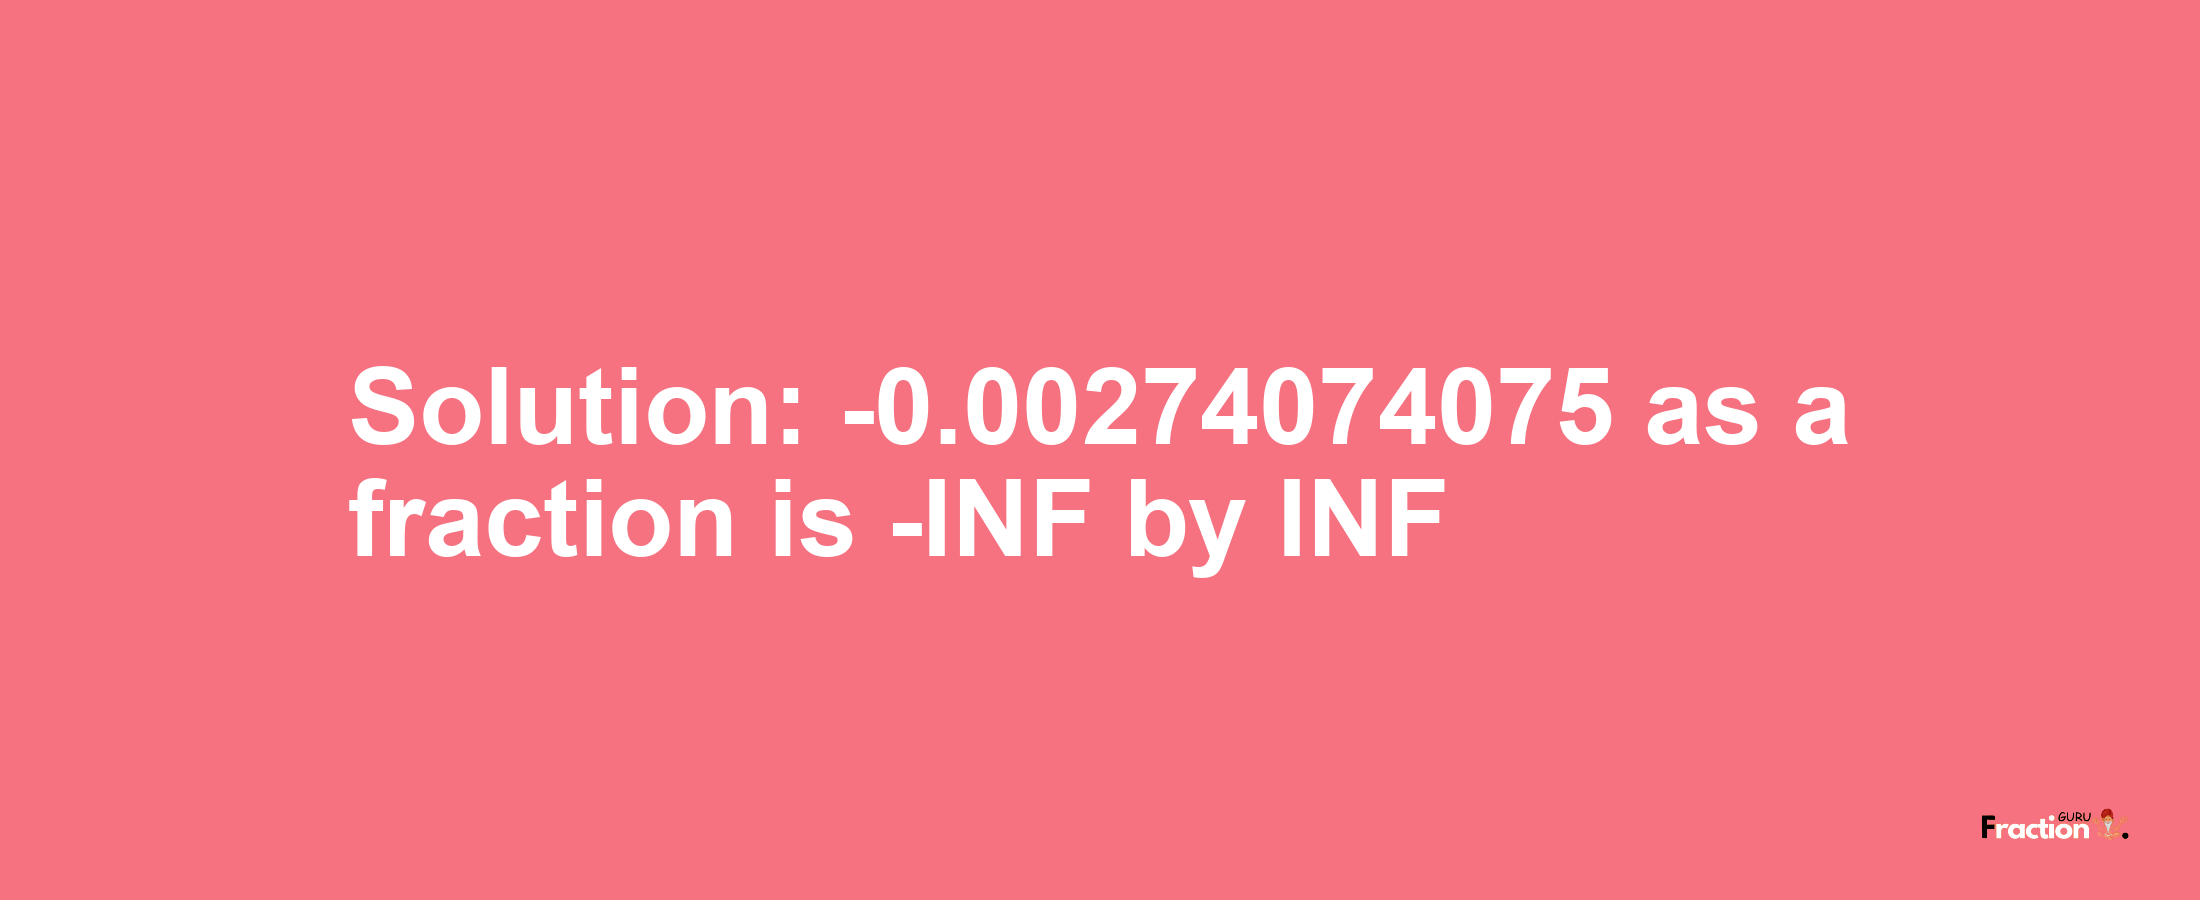 Solution:-0.00274074075 as a fraction is -INF/INF